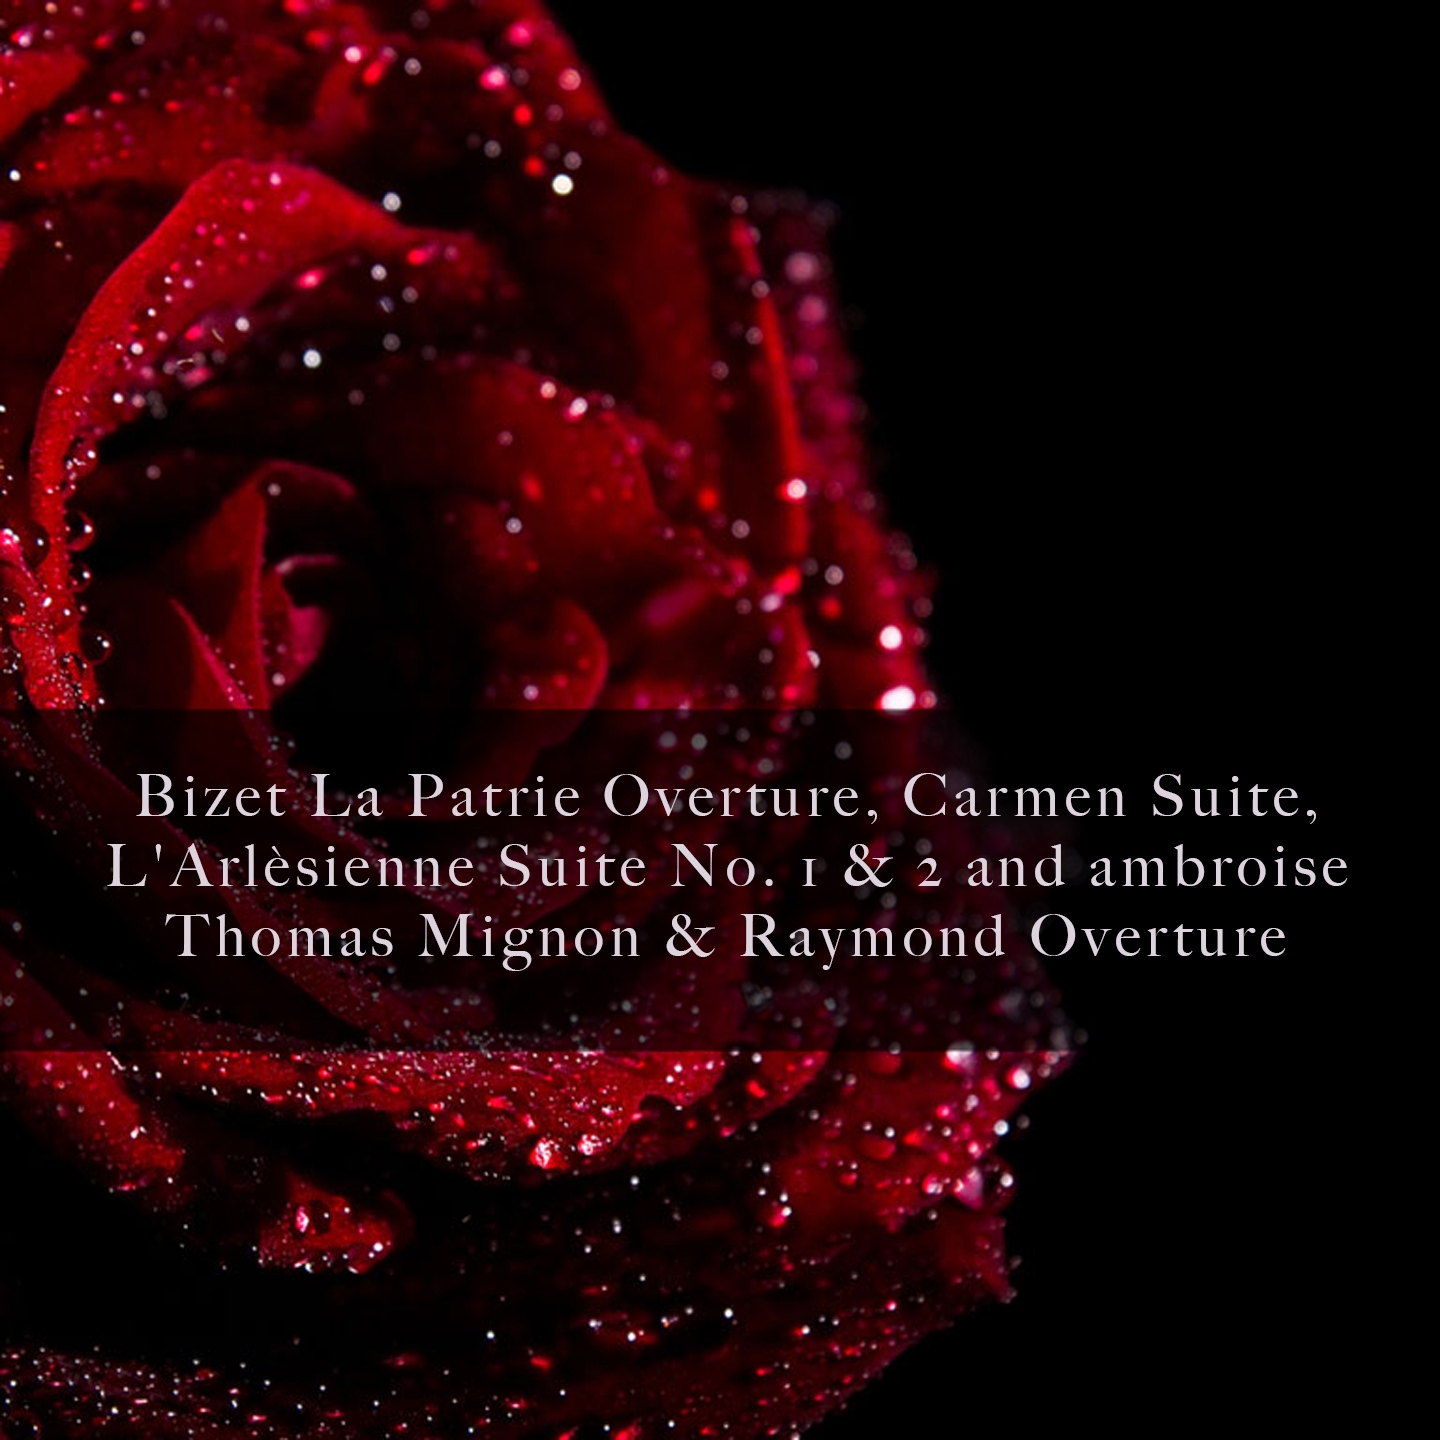 L' Arle sienne Suite No. 1: II. Minetto